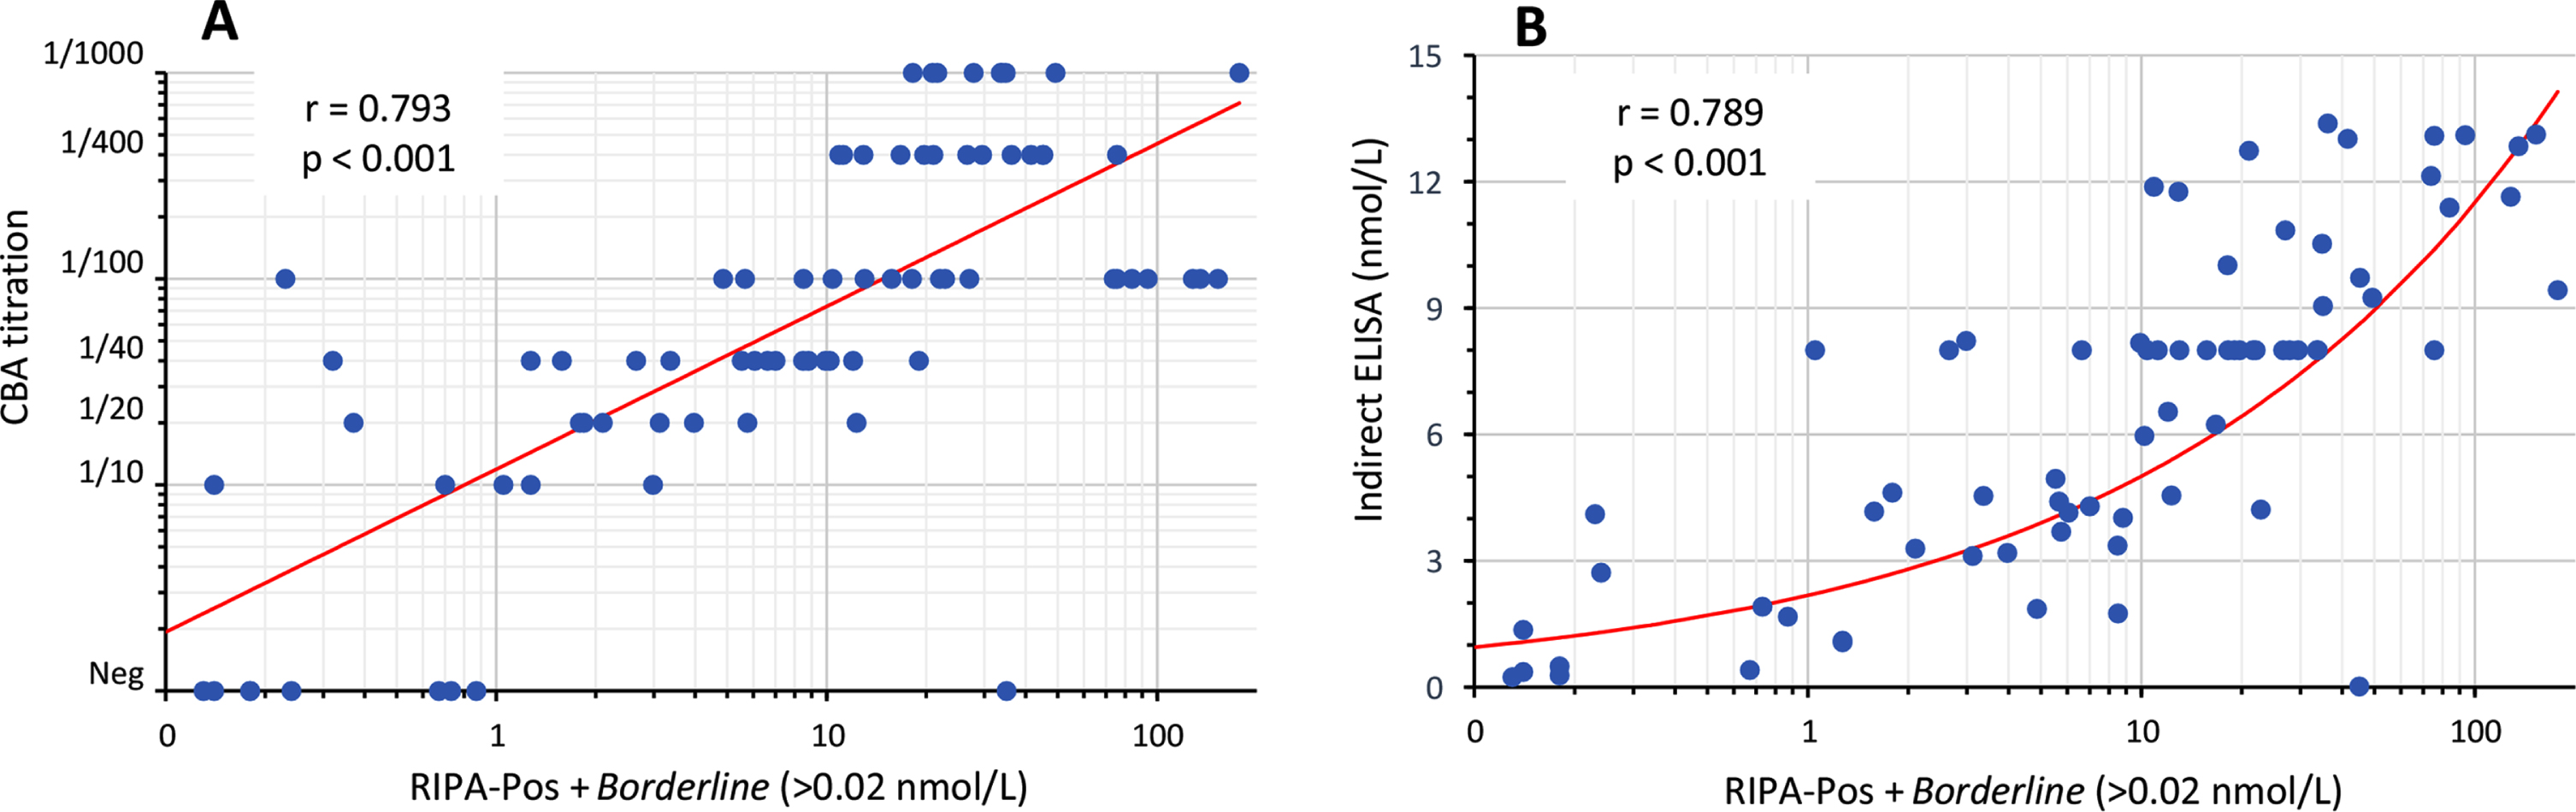 Correlation of anti-AChR levels. (A) Correlation of anti-AChR levels by RIPA (RIPA-Pos+Borderline groups) with the CBA titration (n = 82). (B) Correlation of levels by RIPA with Indirect ELISA (n = 77). Spearman r and p is shown. Each dot represents one sample and the red line indicates the trend.